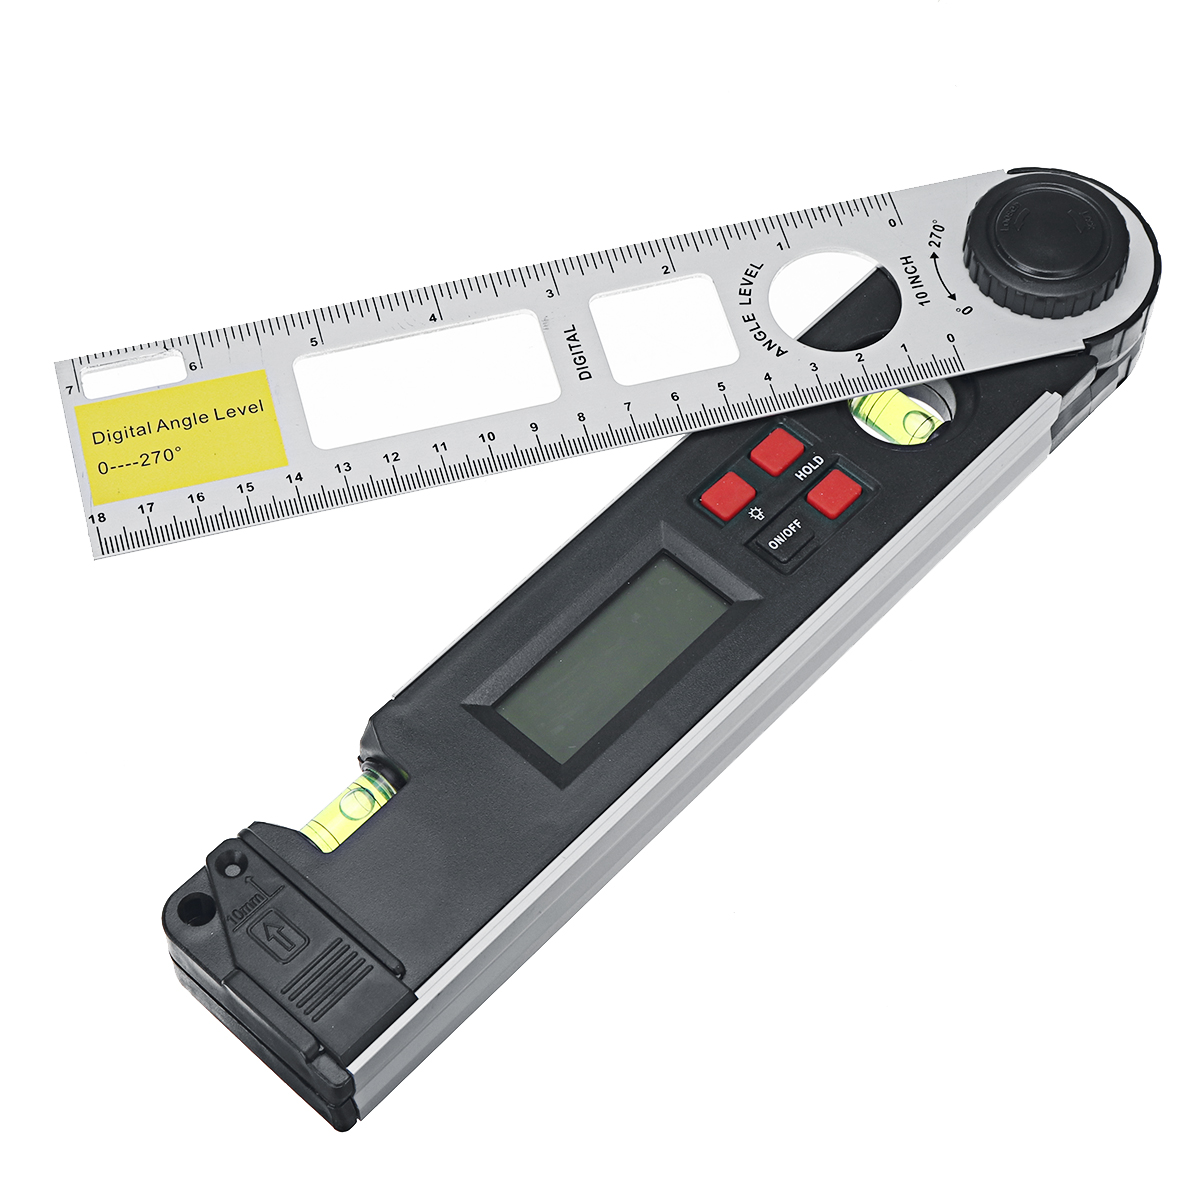 250400mm-Digital-Angle-Level-Meter-LCD-Display-0-225-Degree-for-Measuring-Roof-Angles-Fitting-Up-Win-1740234-8